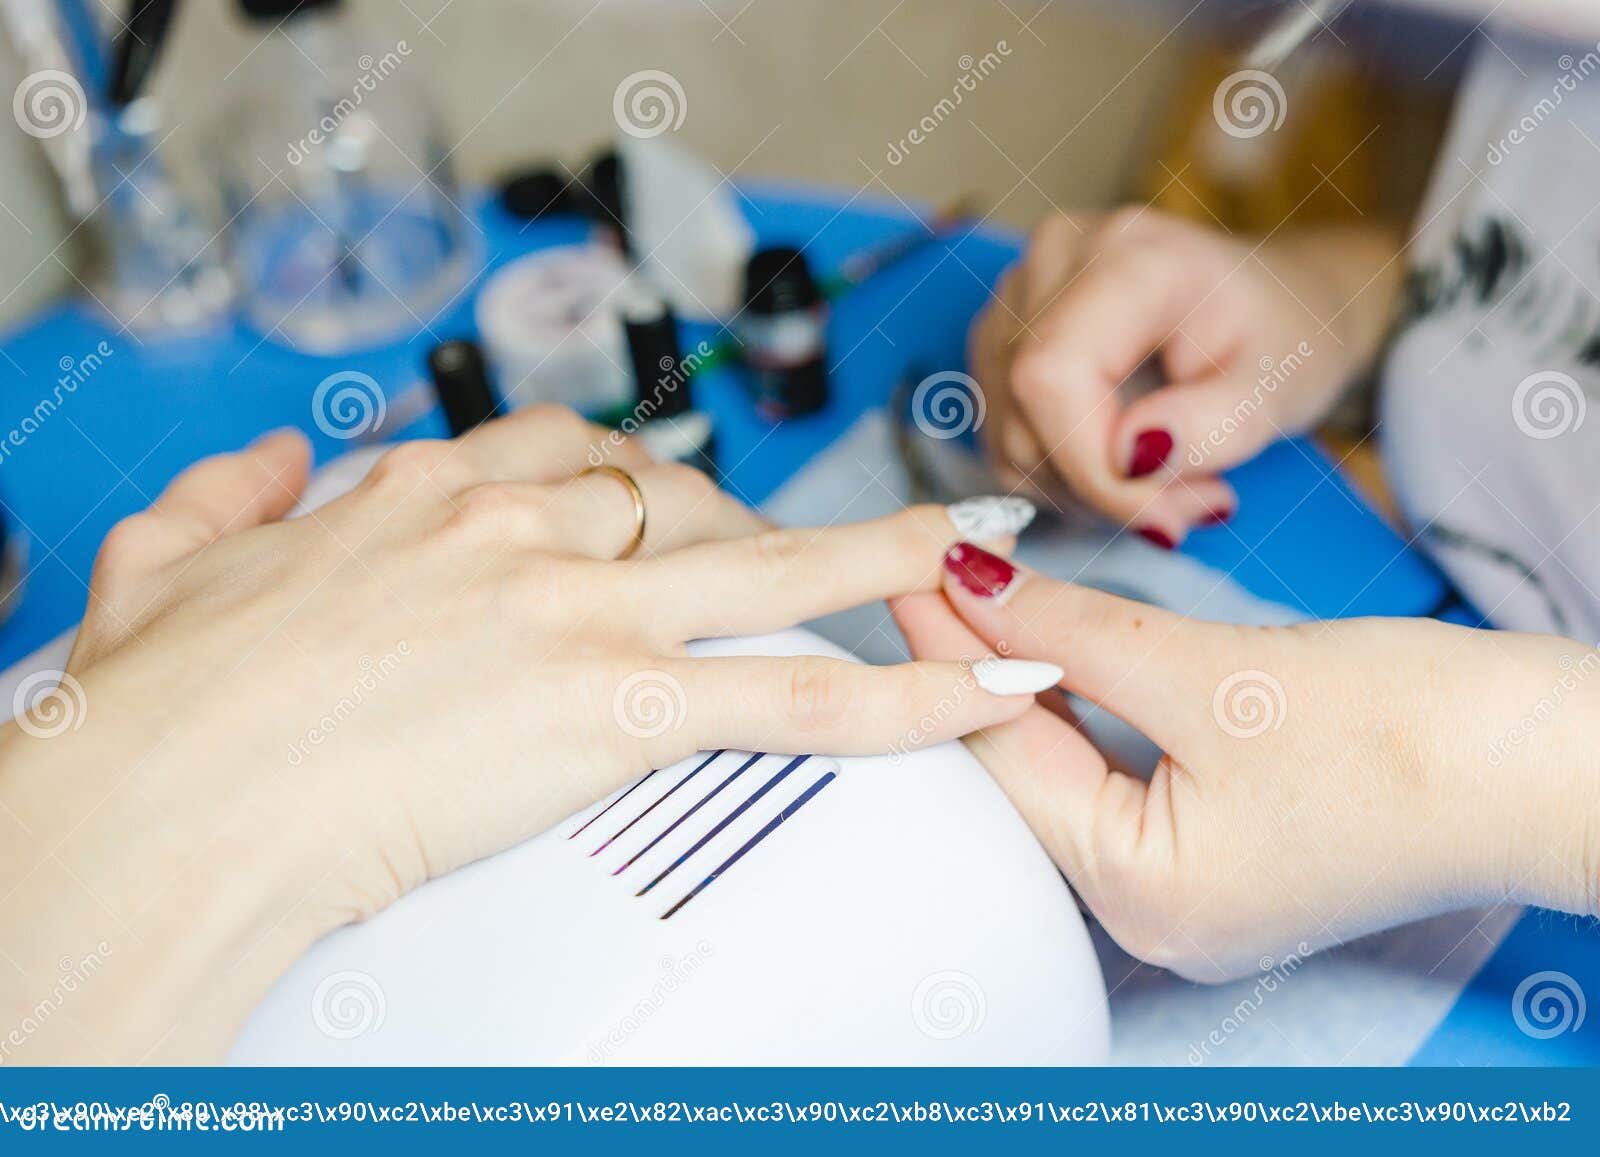 manicure. the woman cleans and paints nails. the woman processes nails on hands a varnish. shelak. gel, a varnish, placing acryle